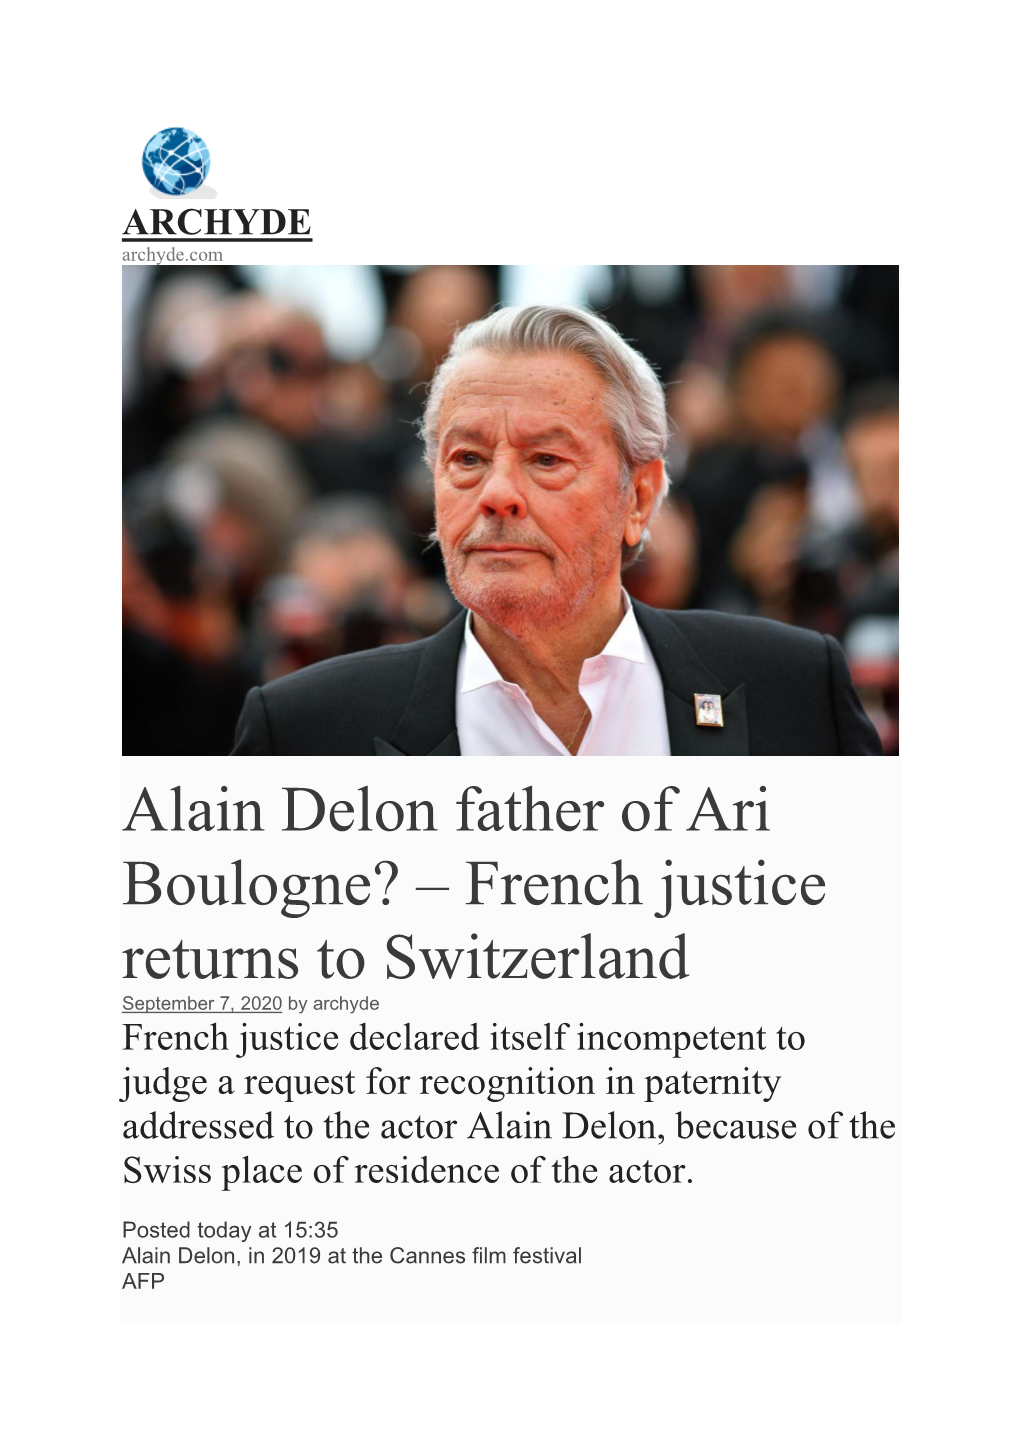 Alain Delon Father of Ari Boulogne? – French Justice Returns to Switzerland